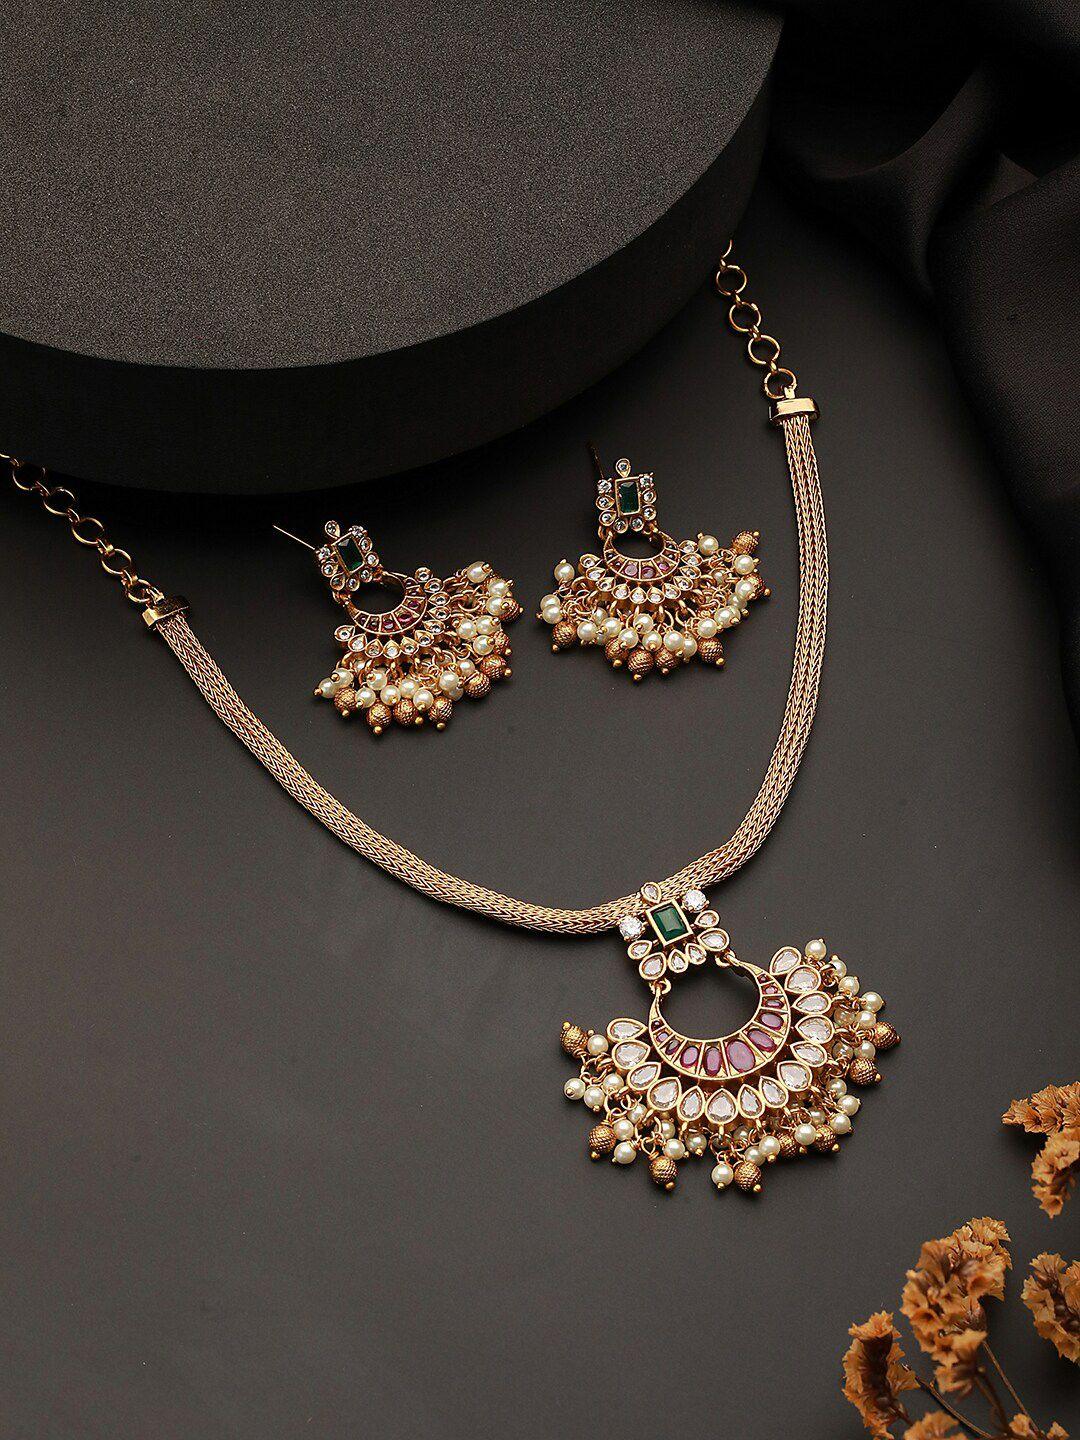 Saraf RS Jewellery 22K Gold-Plated American Diamond-Studded & Beaded Necklace & Earrings